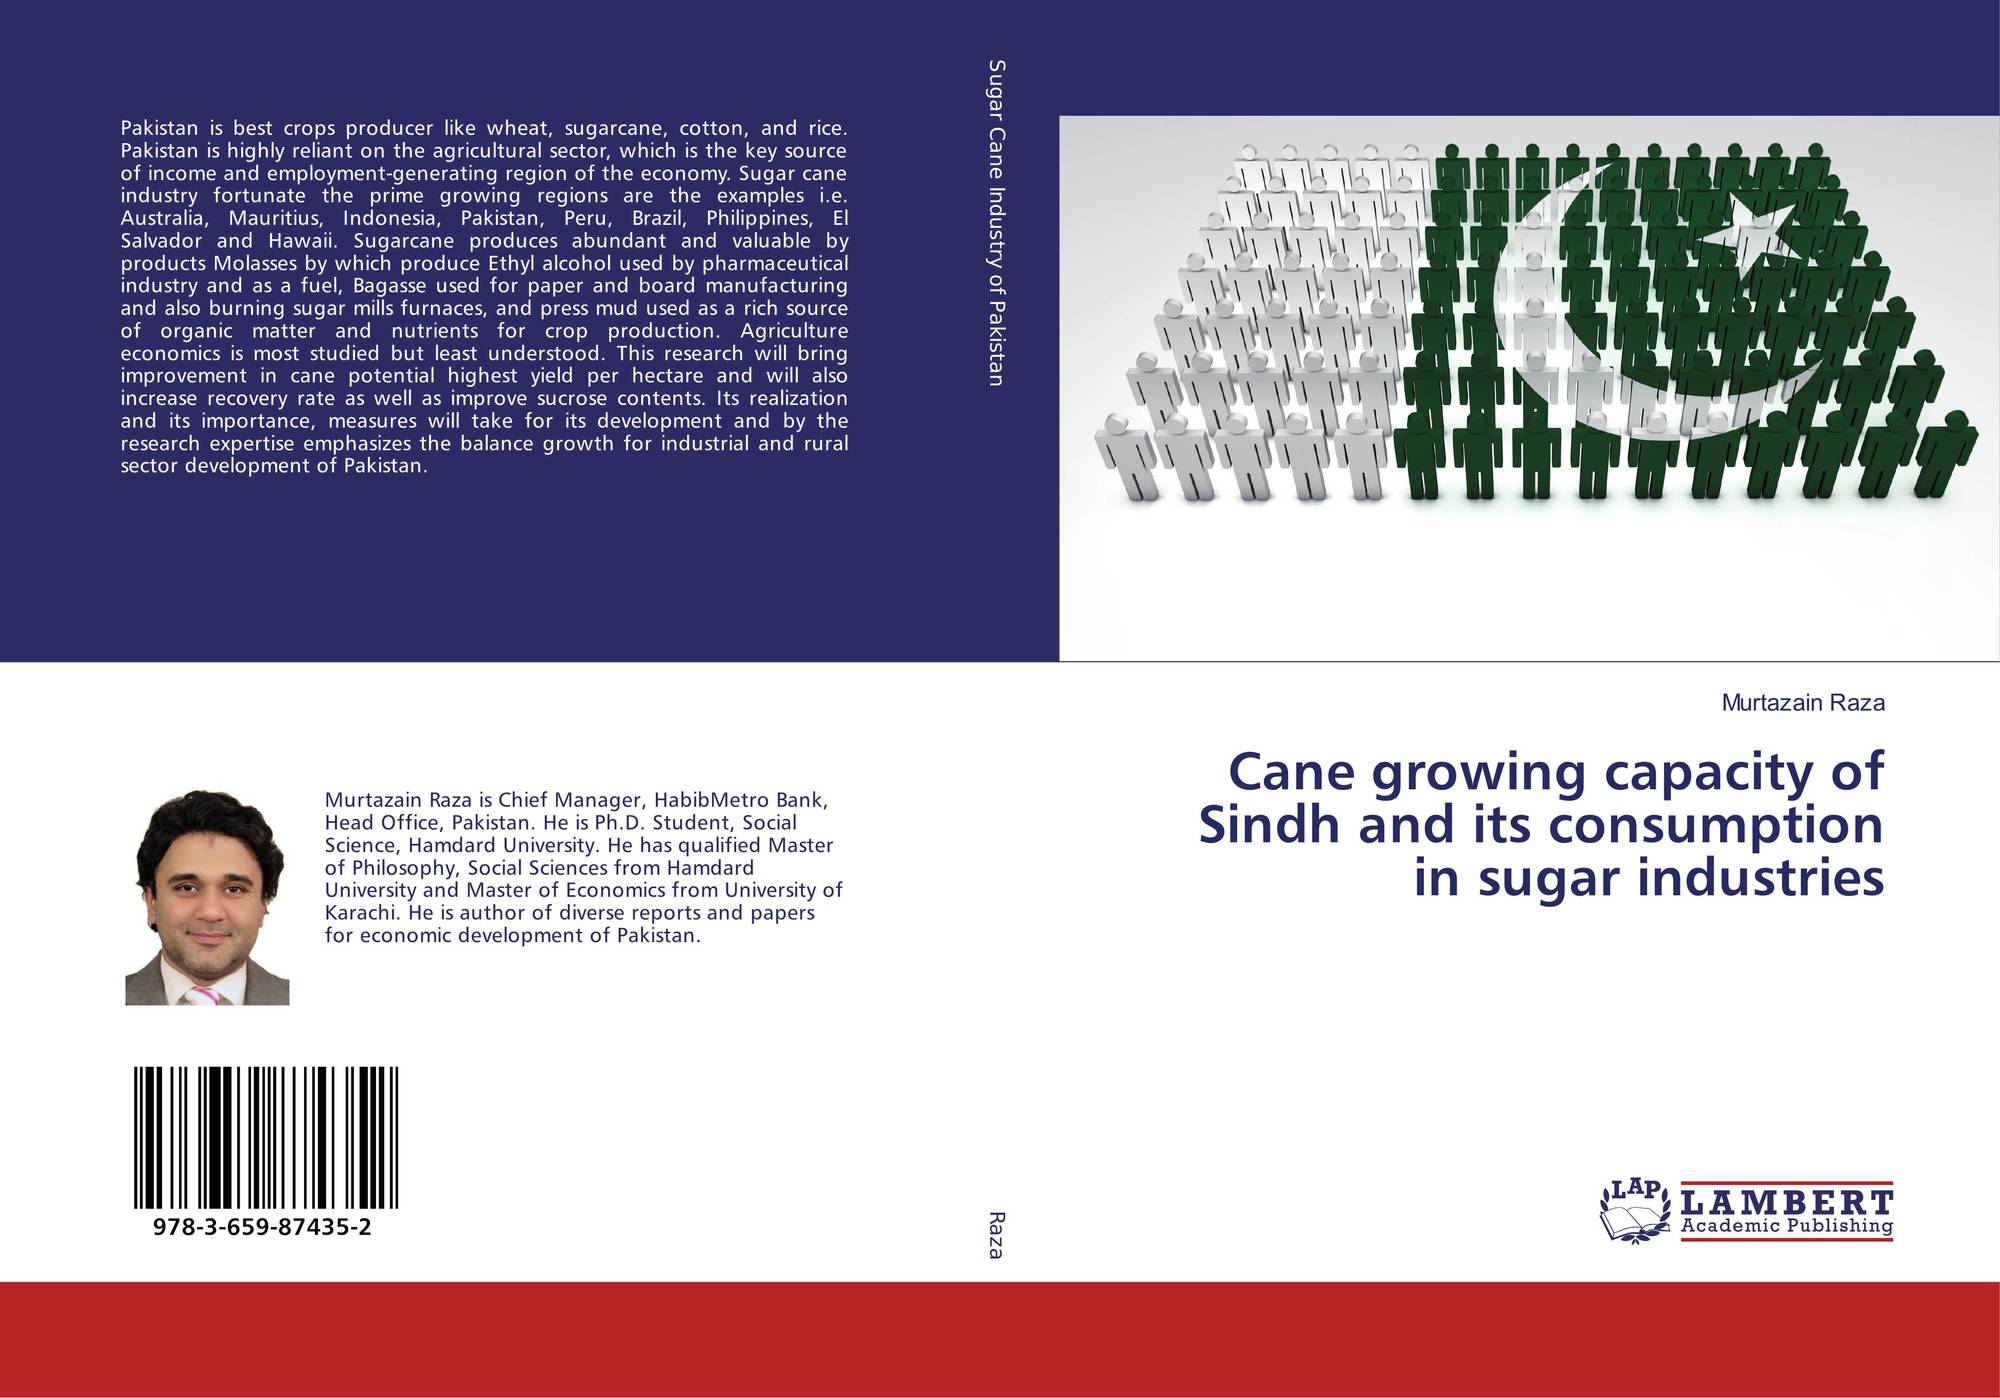 cane growing sugar sindh consumption industries capacity its